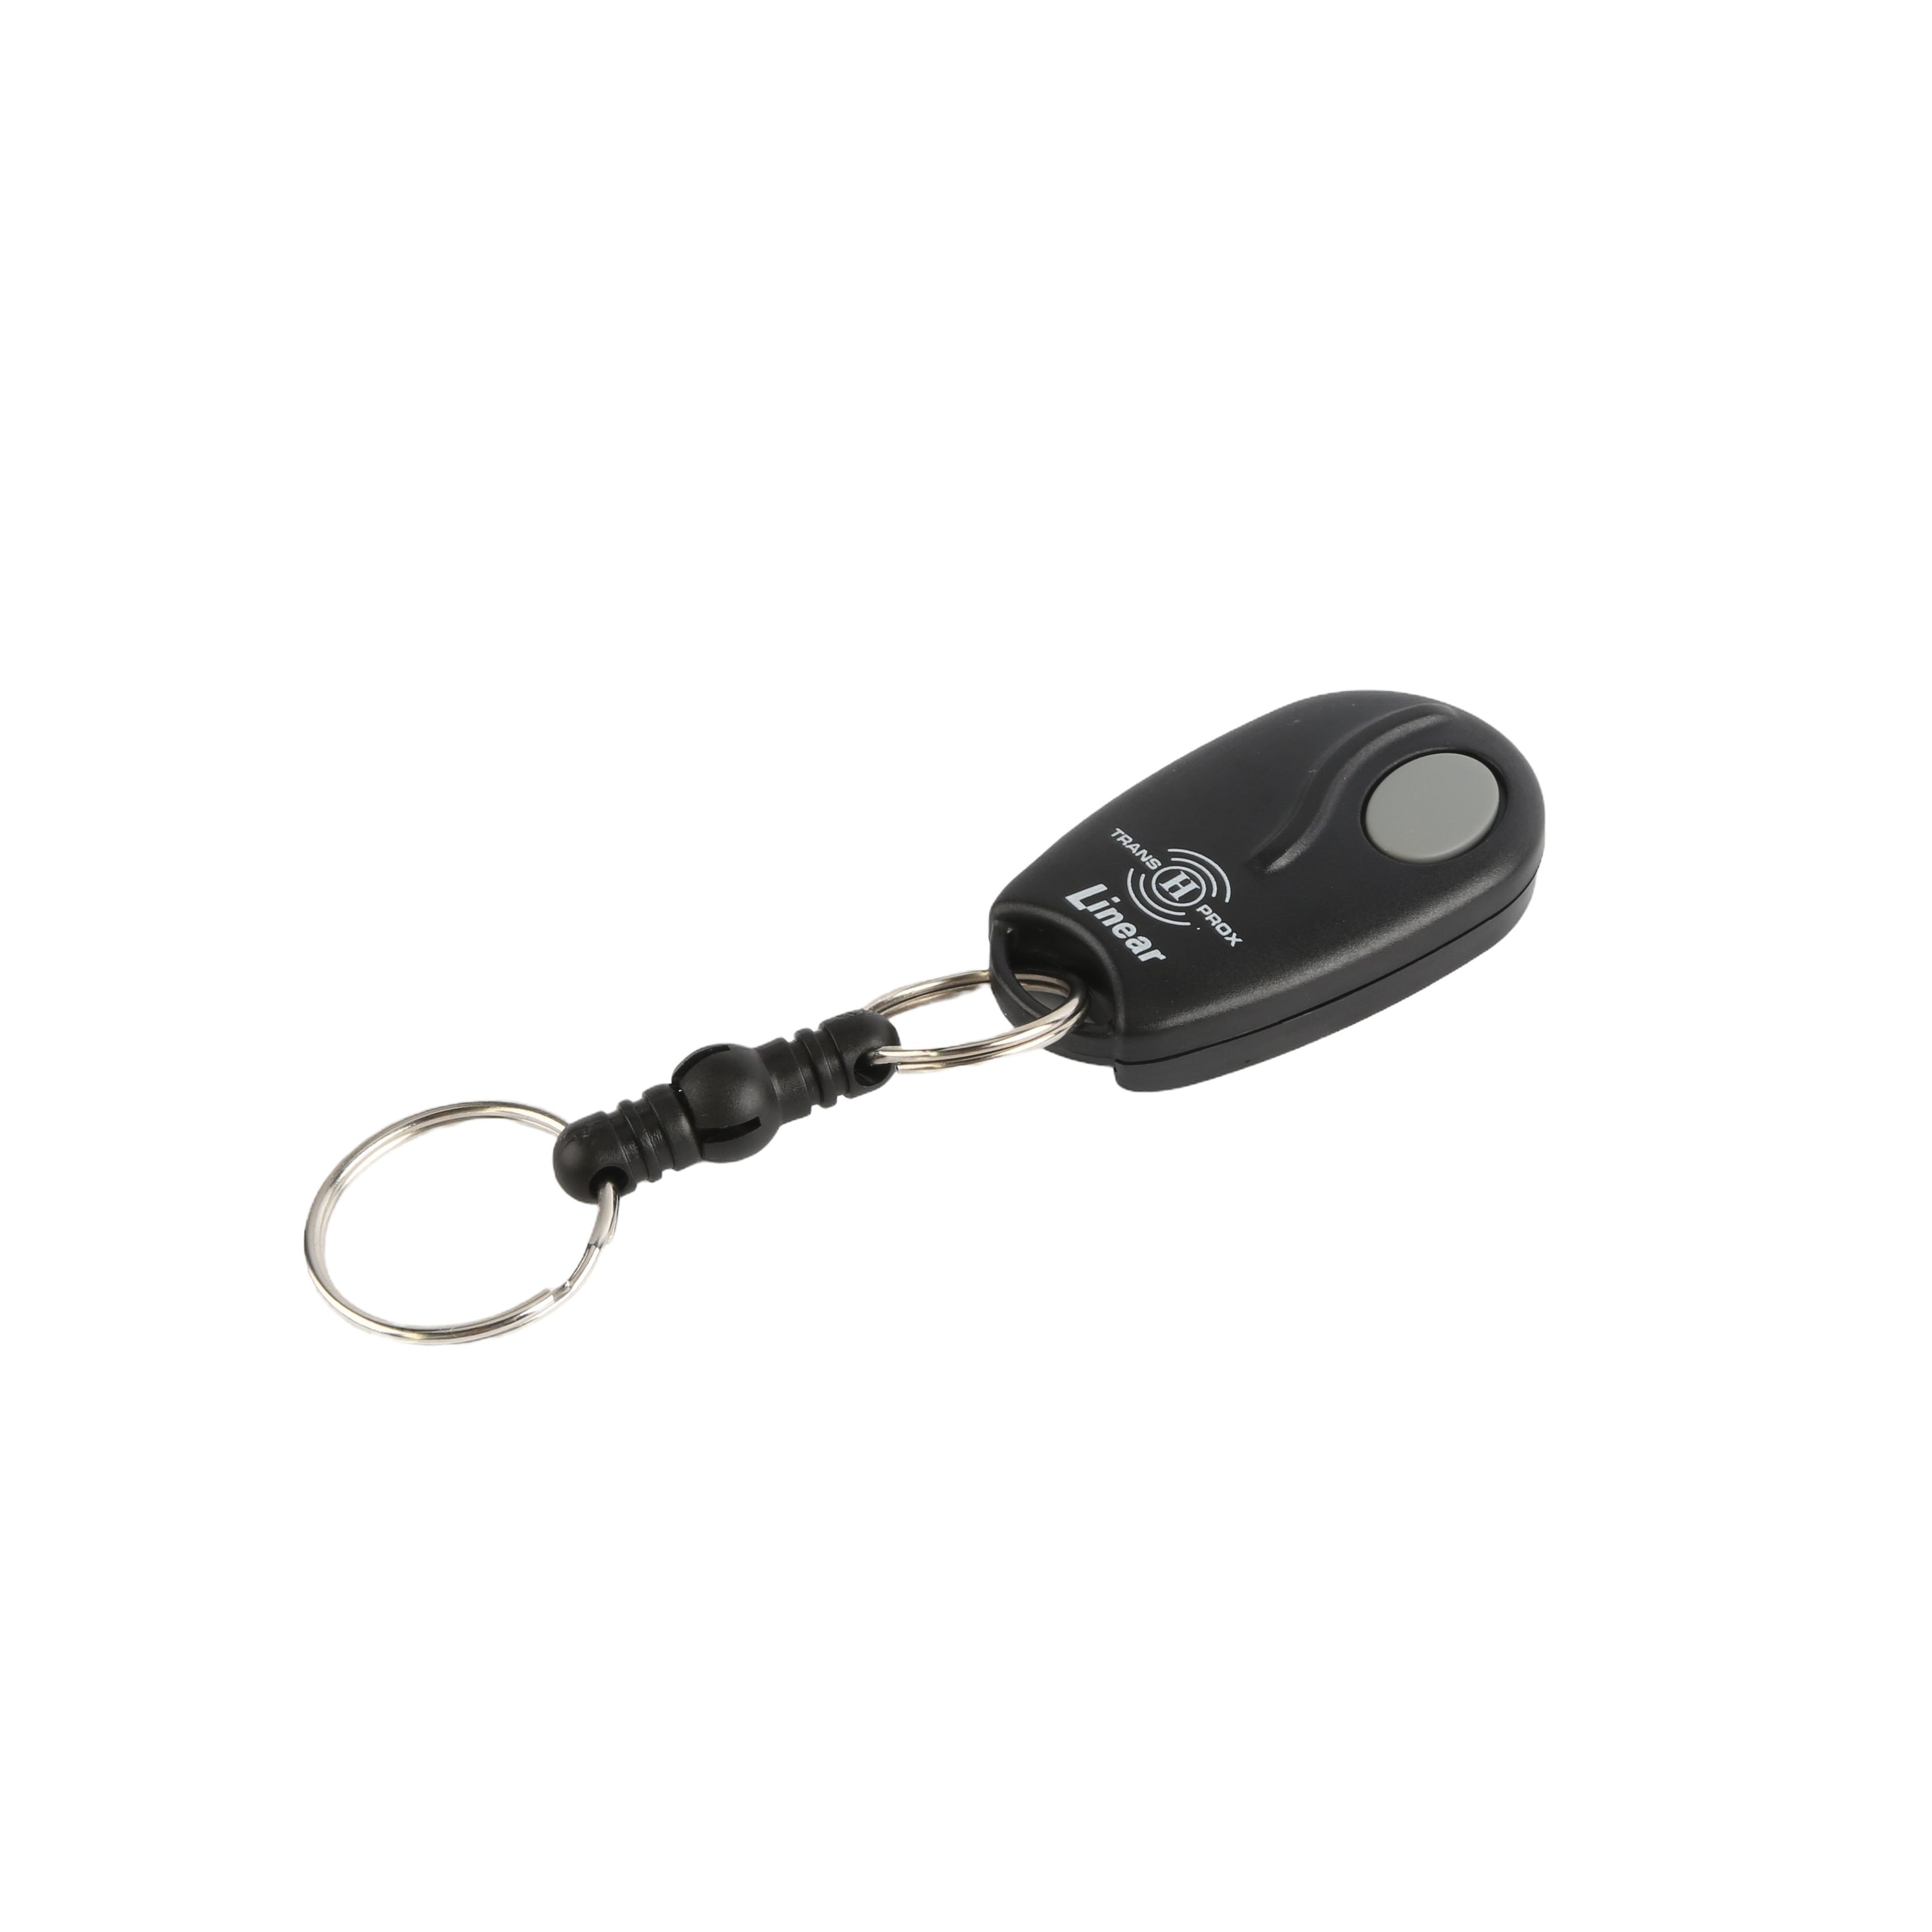 Linear ACT-31DH 1-Channel Key Chain, TRANS PROX - HID Compatible ...